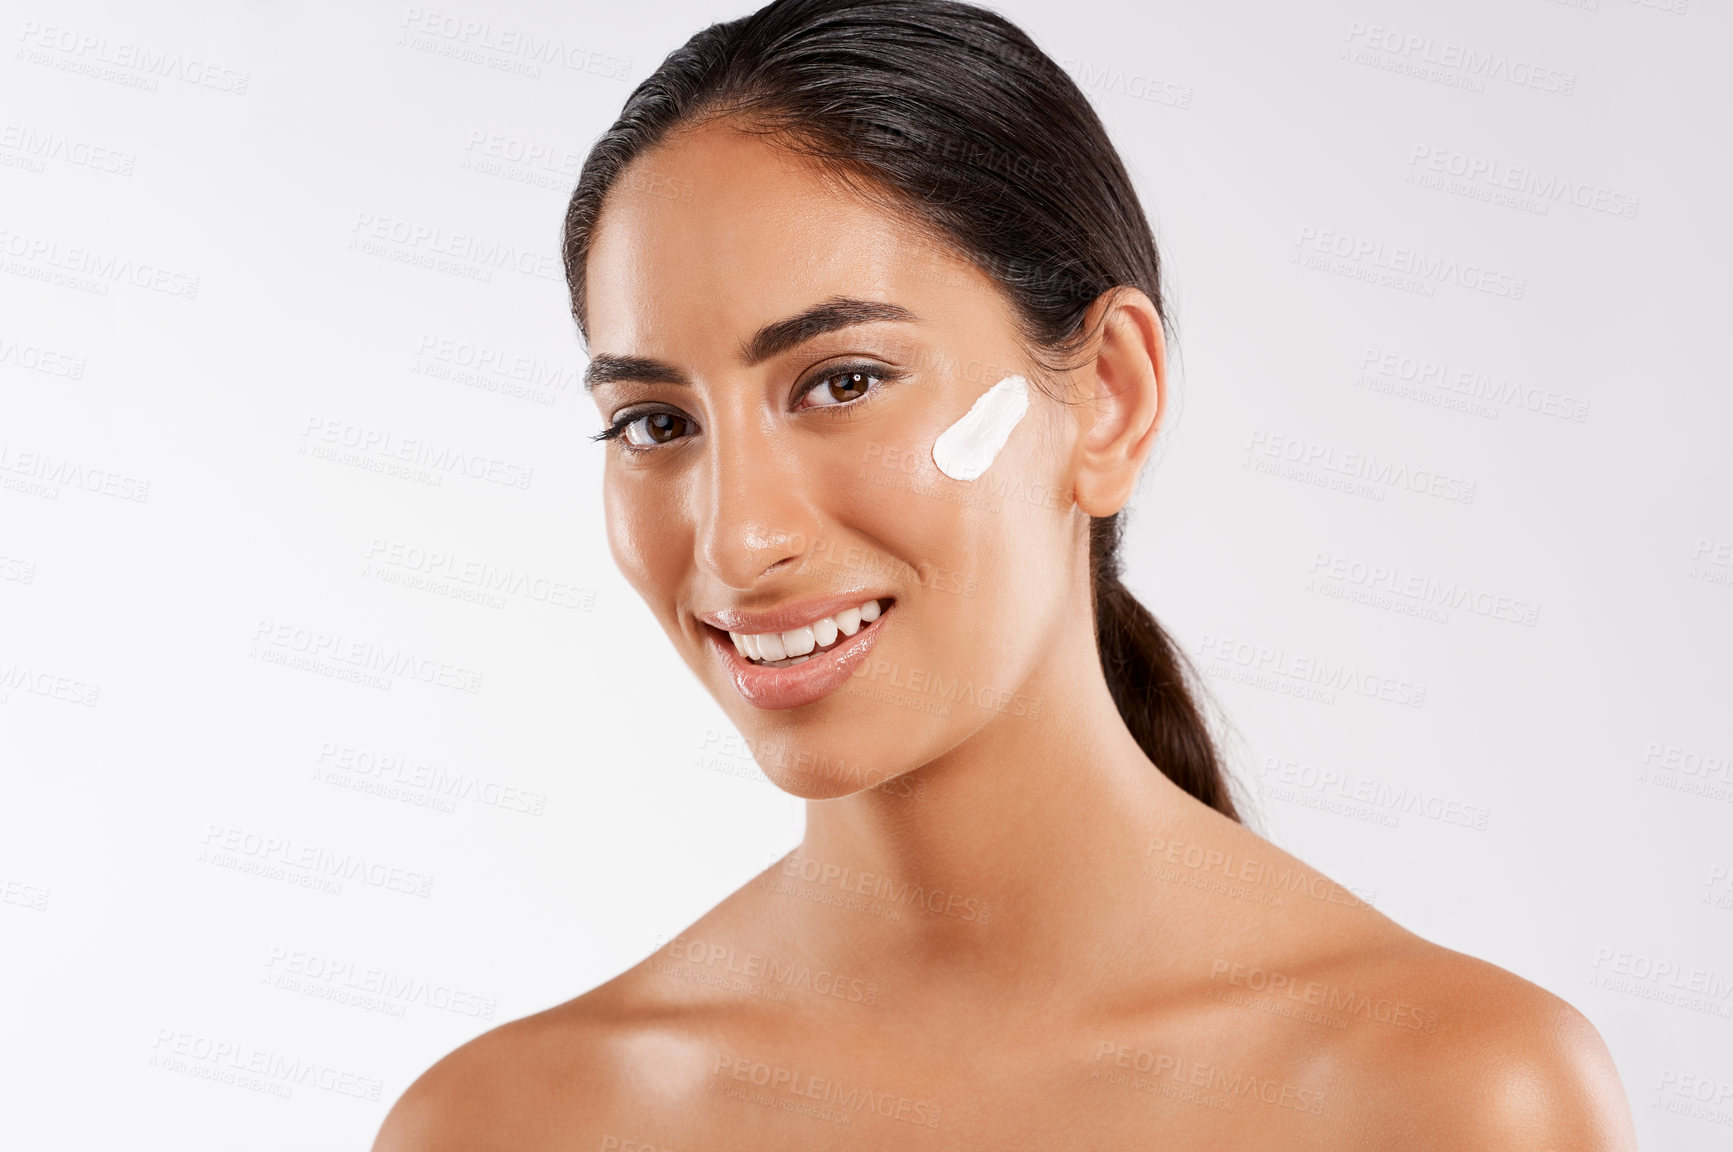 Buy stock photo Studio portrait of a beautiful young woman posing with lotion on her face against a gray background